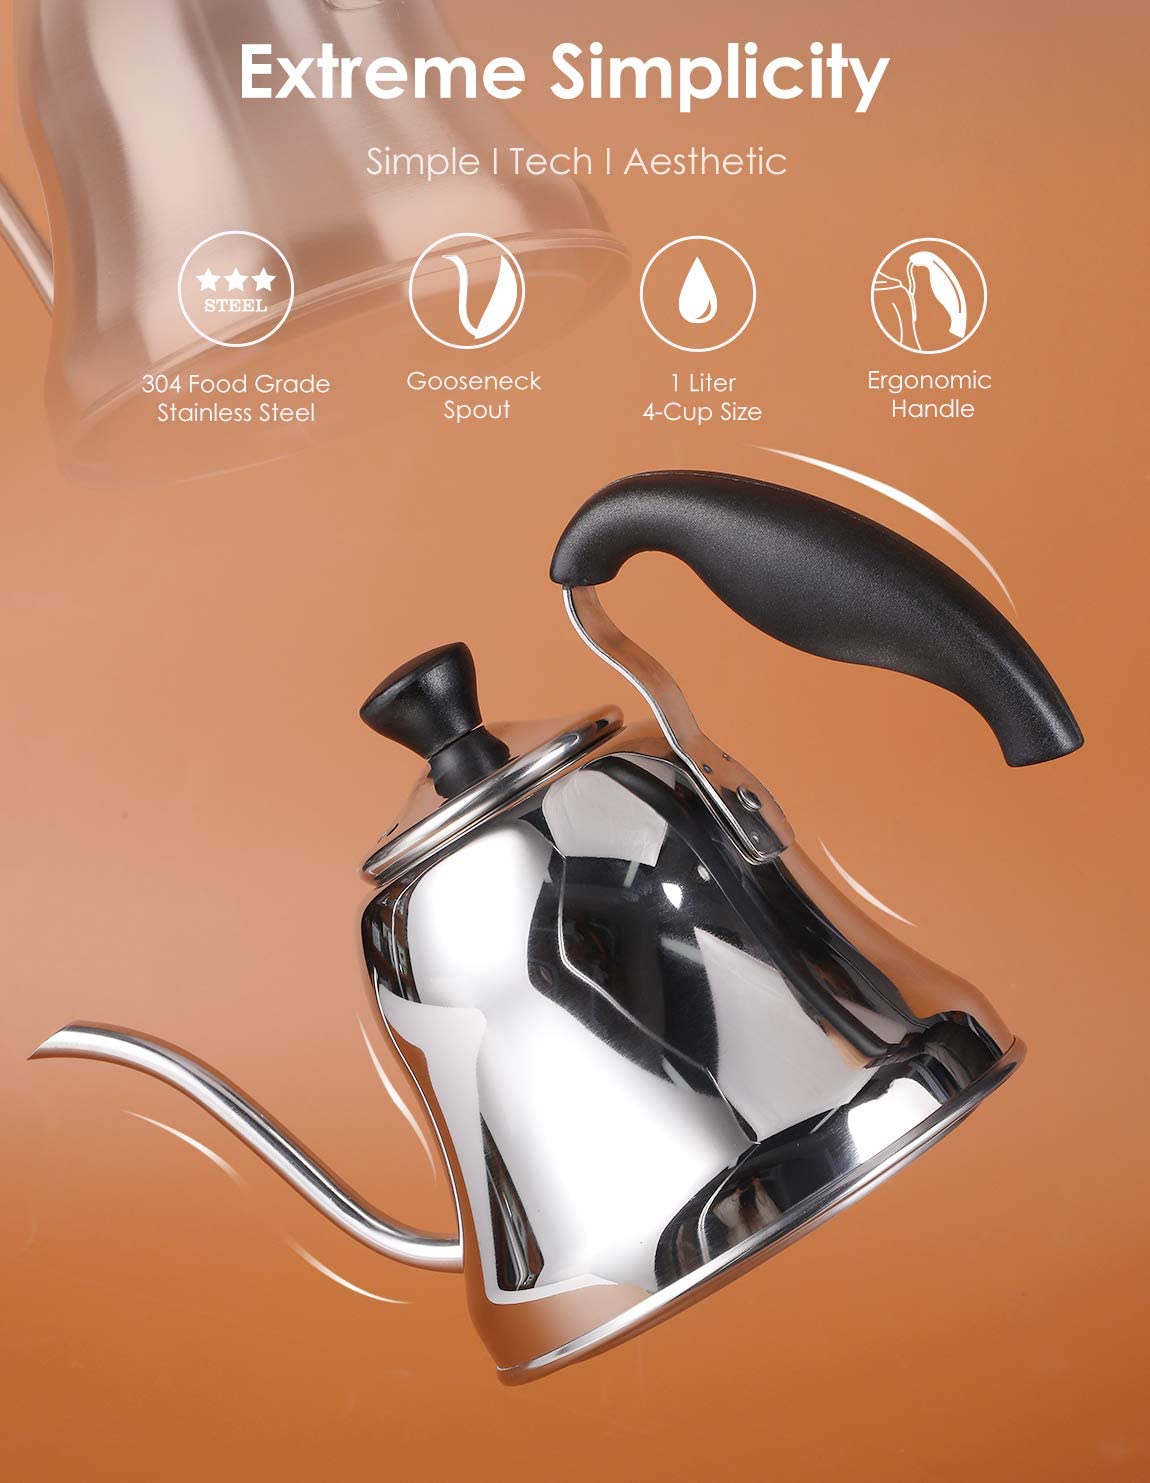 Stainless Steel Goose Neck Kettle